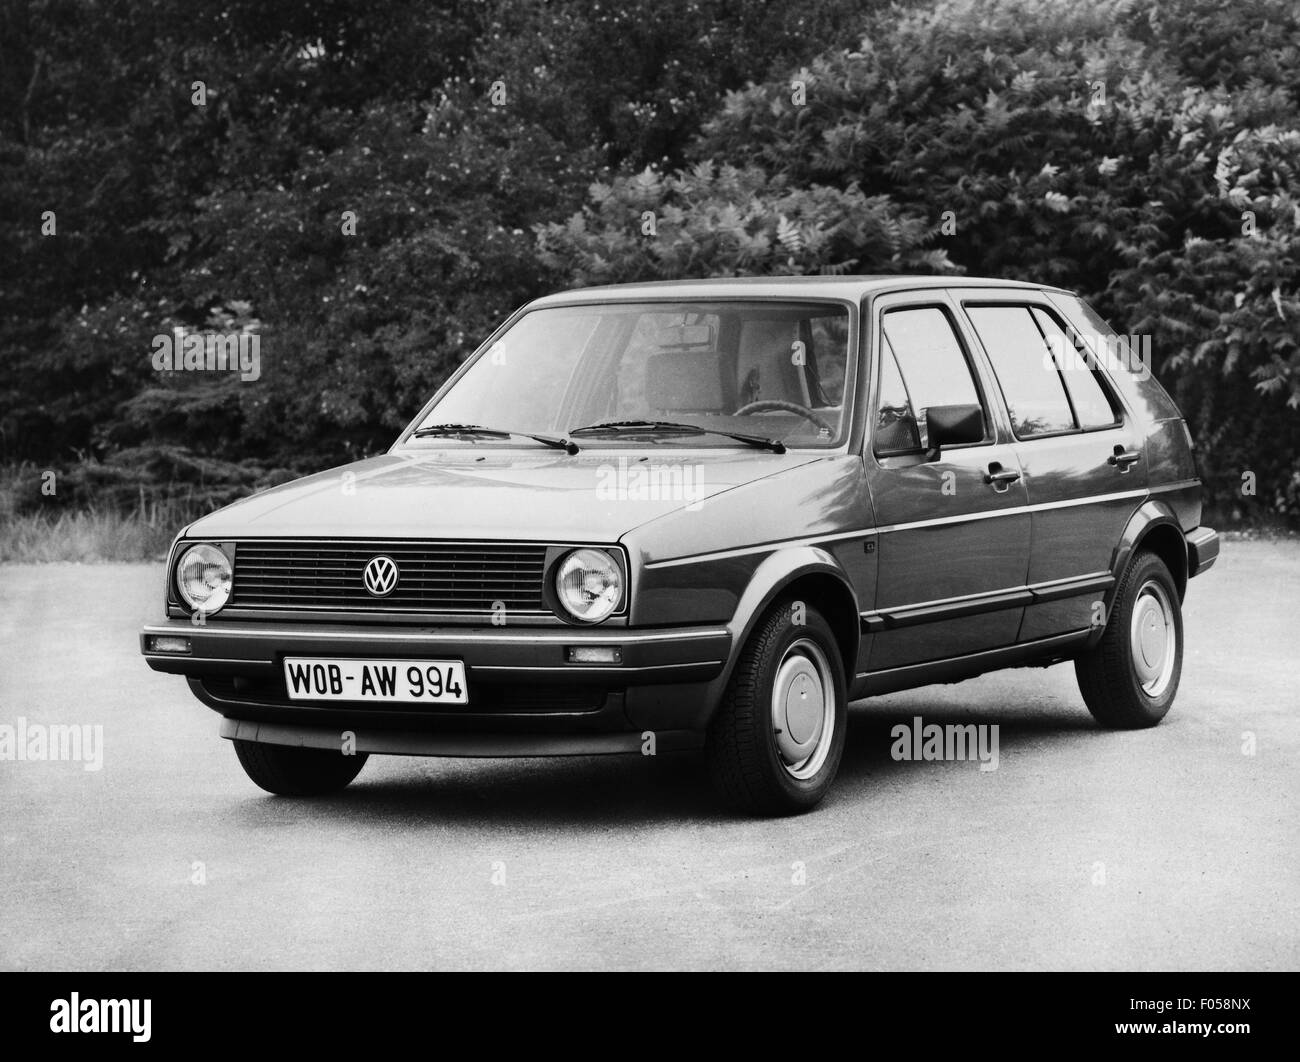 transport / transportation, car, vehicle variants, Volkswagen, VW Golf Mk2  CL, 1980s, Additional-Rights-Clearences-Not Available Stock Photo - Alamy